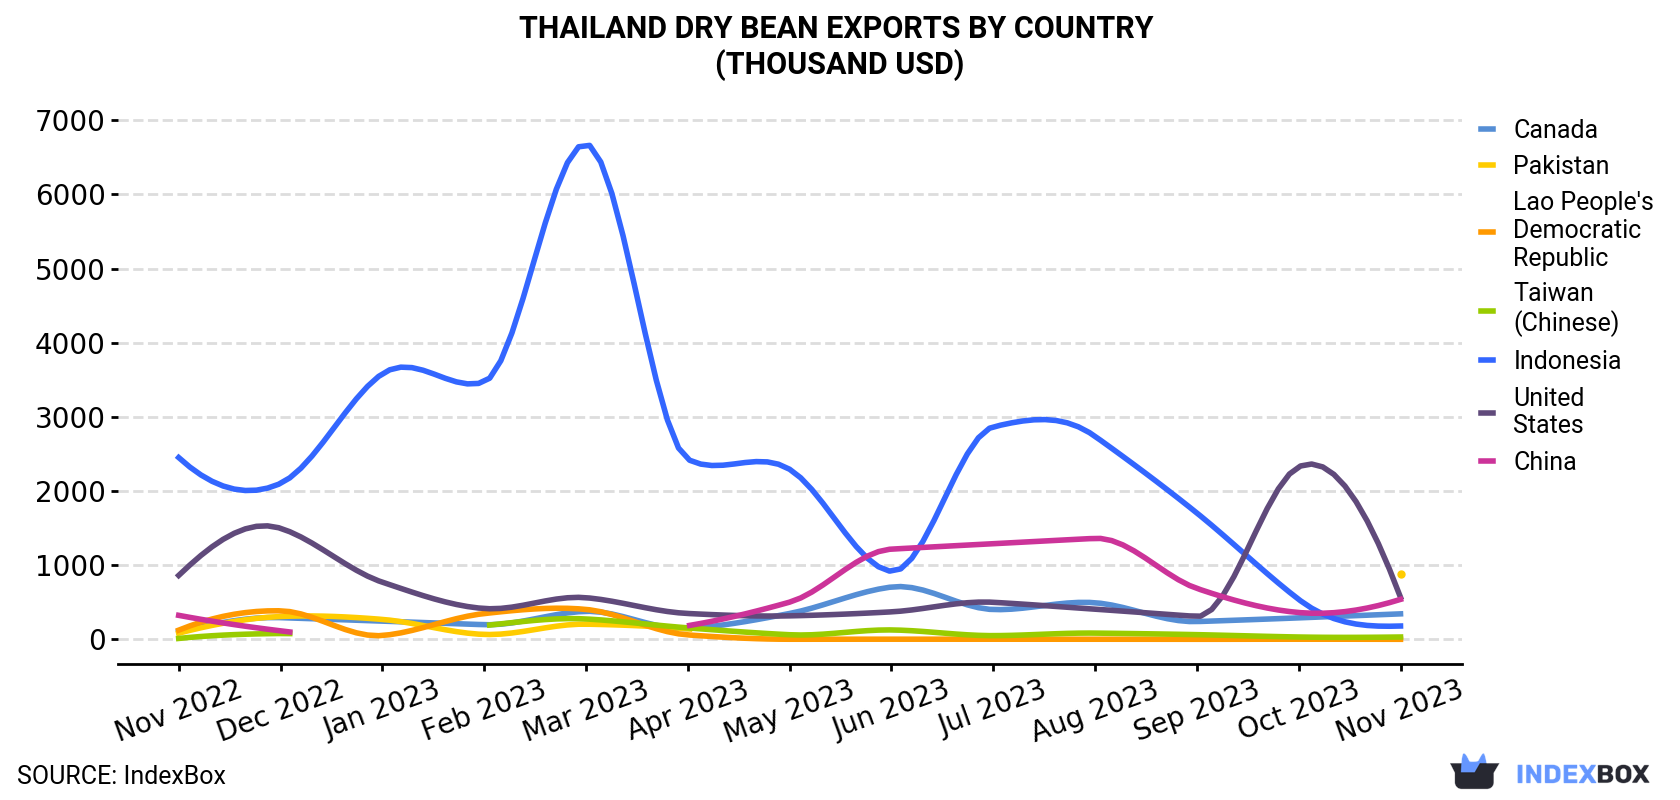 Thailand Dry Bean Exports By Country (Thousand USD)